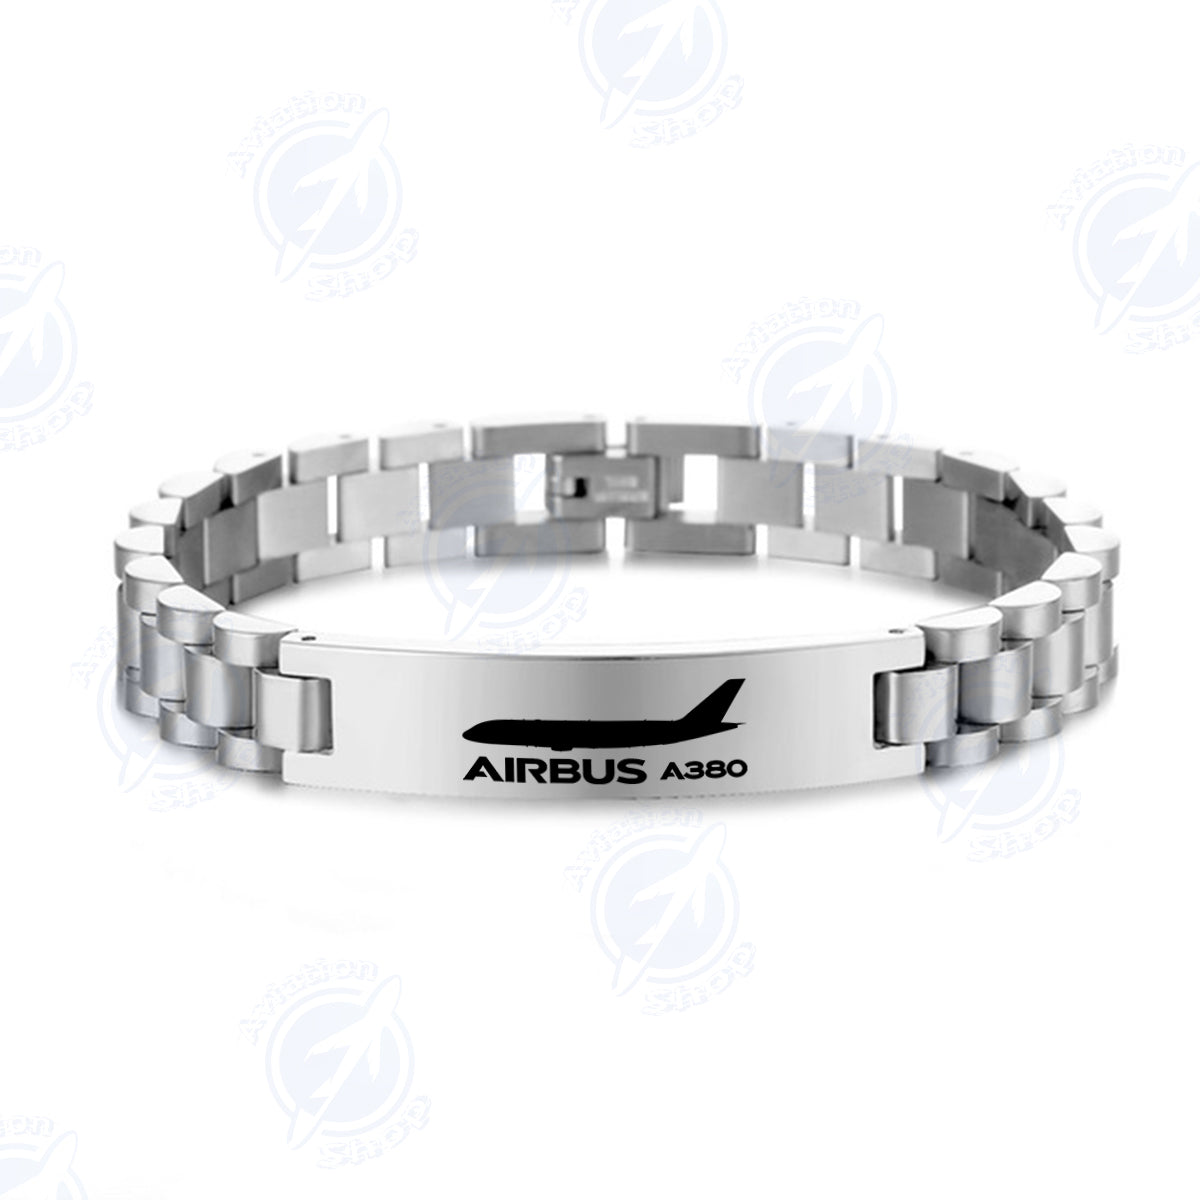 The Airbus A380 Designed Stainless Steel Chain Bracelets